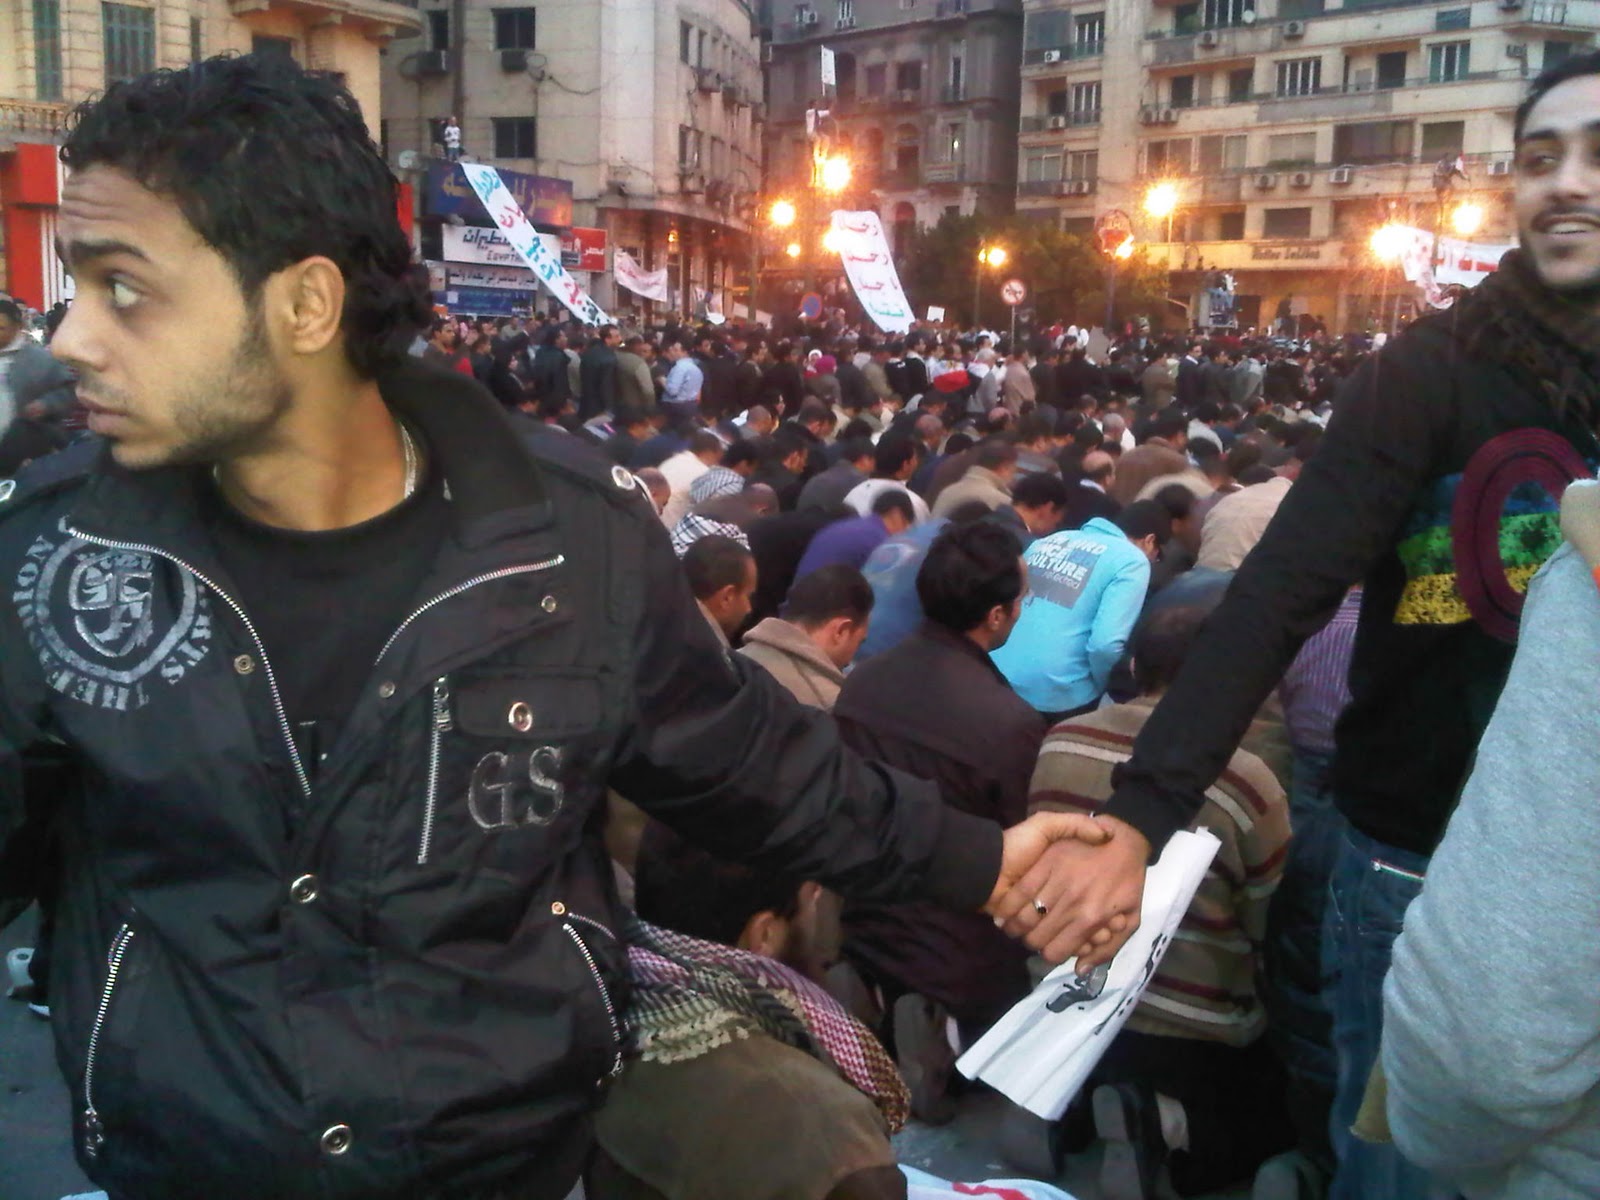 Christians protect Muslims in prayer at Tahrir Square during the Egyptian Revolution. 2011